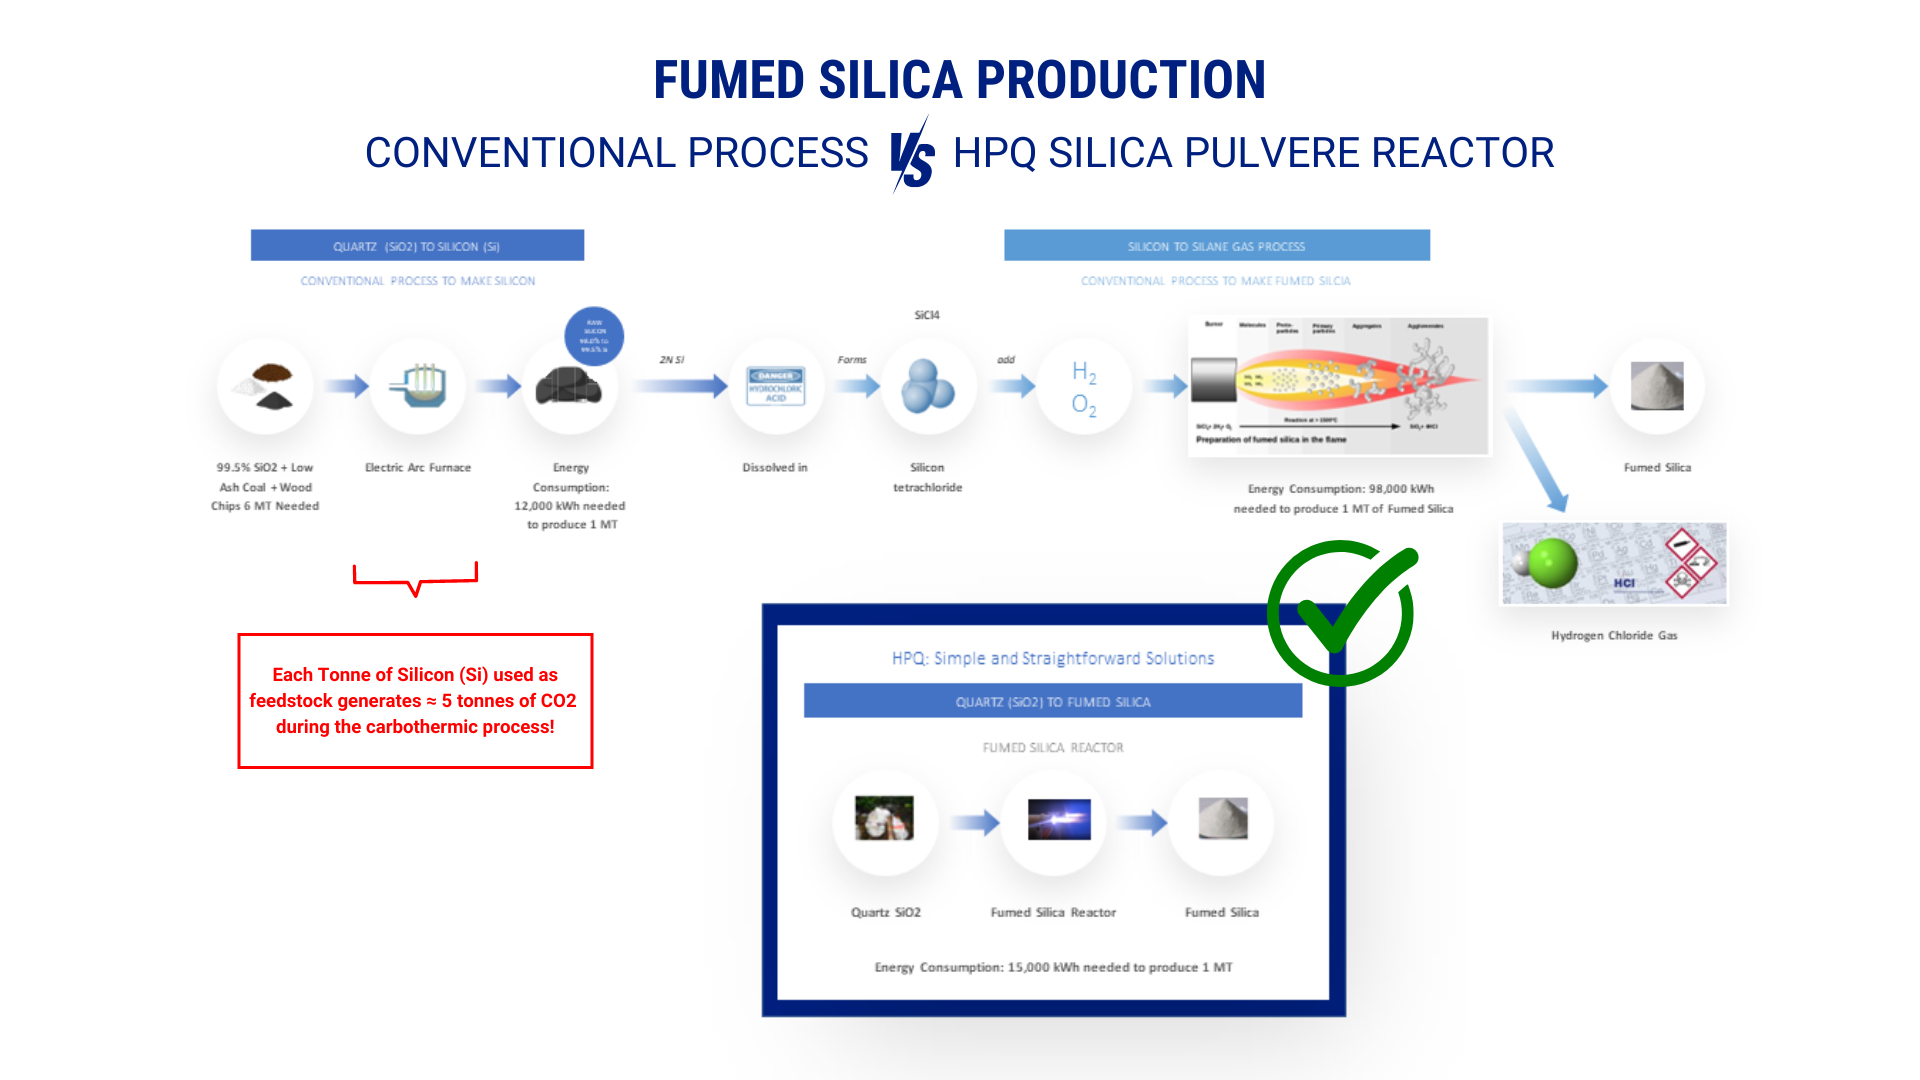 Fumed Silica Production - Conventional process vs HPQ POLVERE